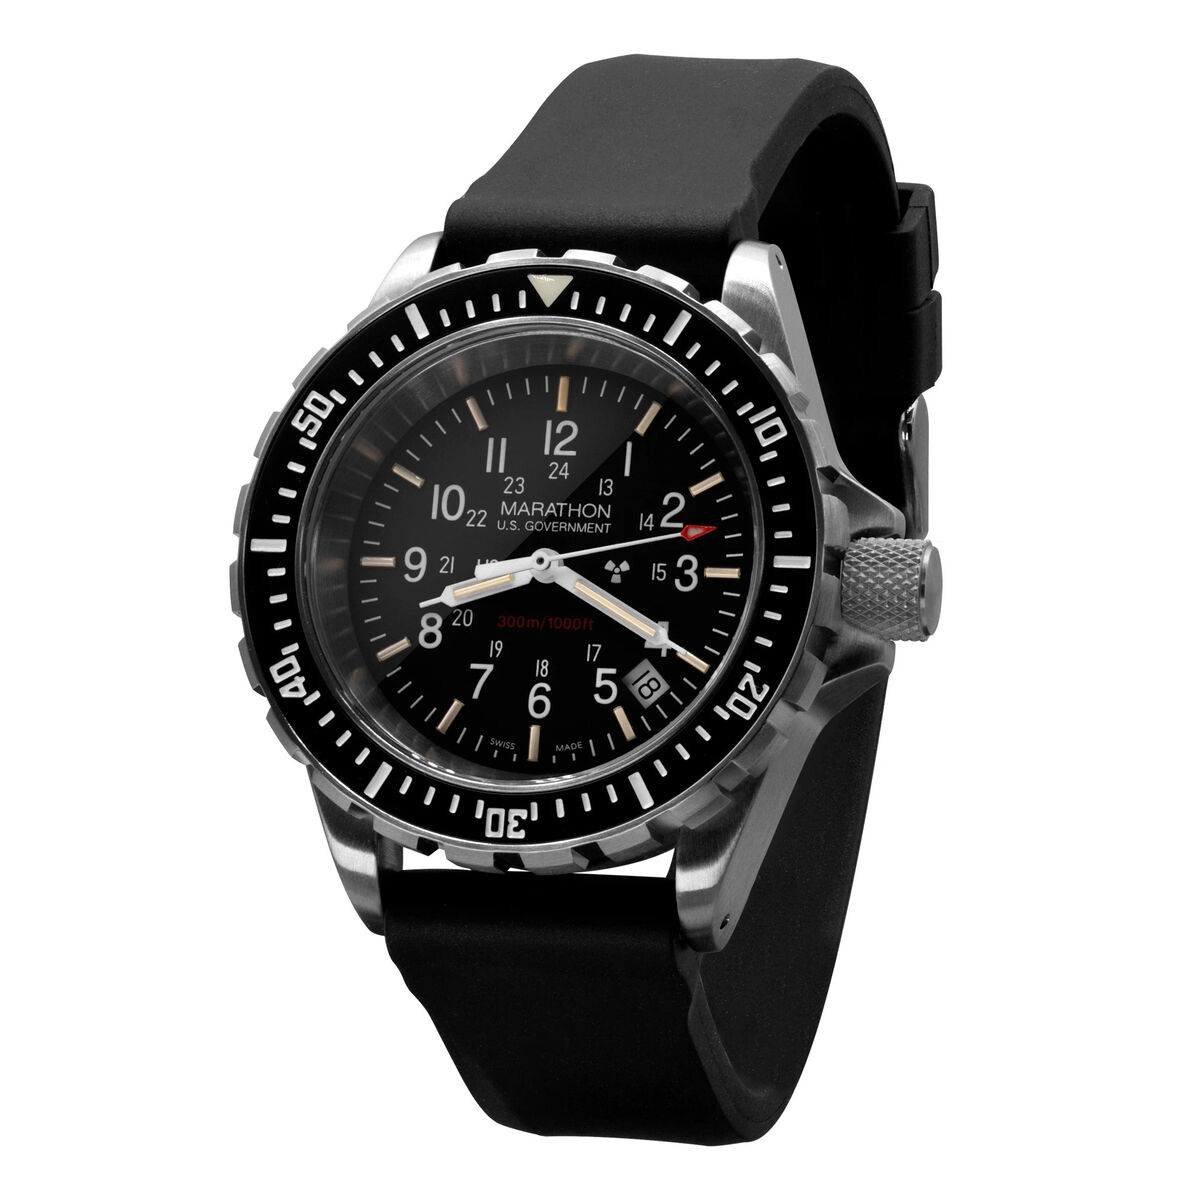 Marathon TSAR Search and Rescue Dive Watch - US Government Markings